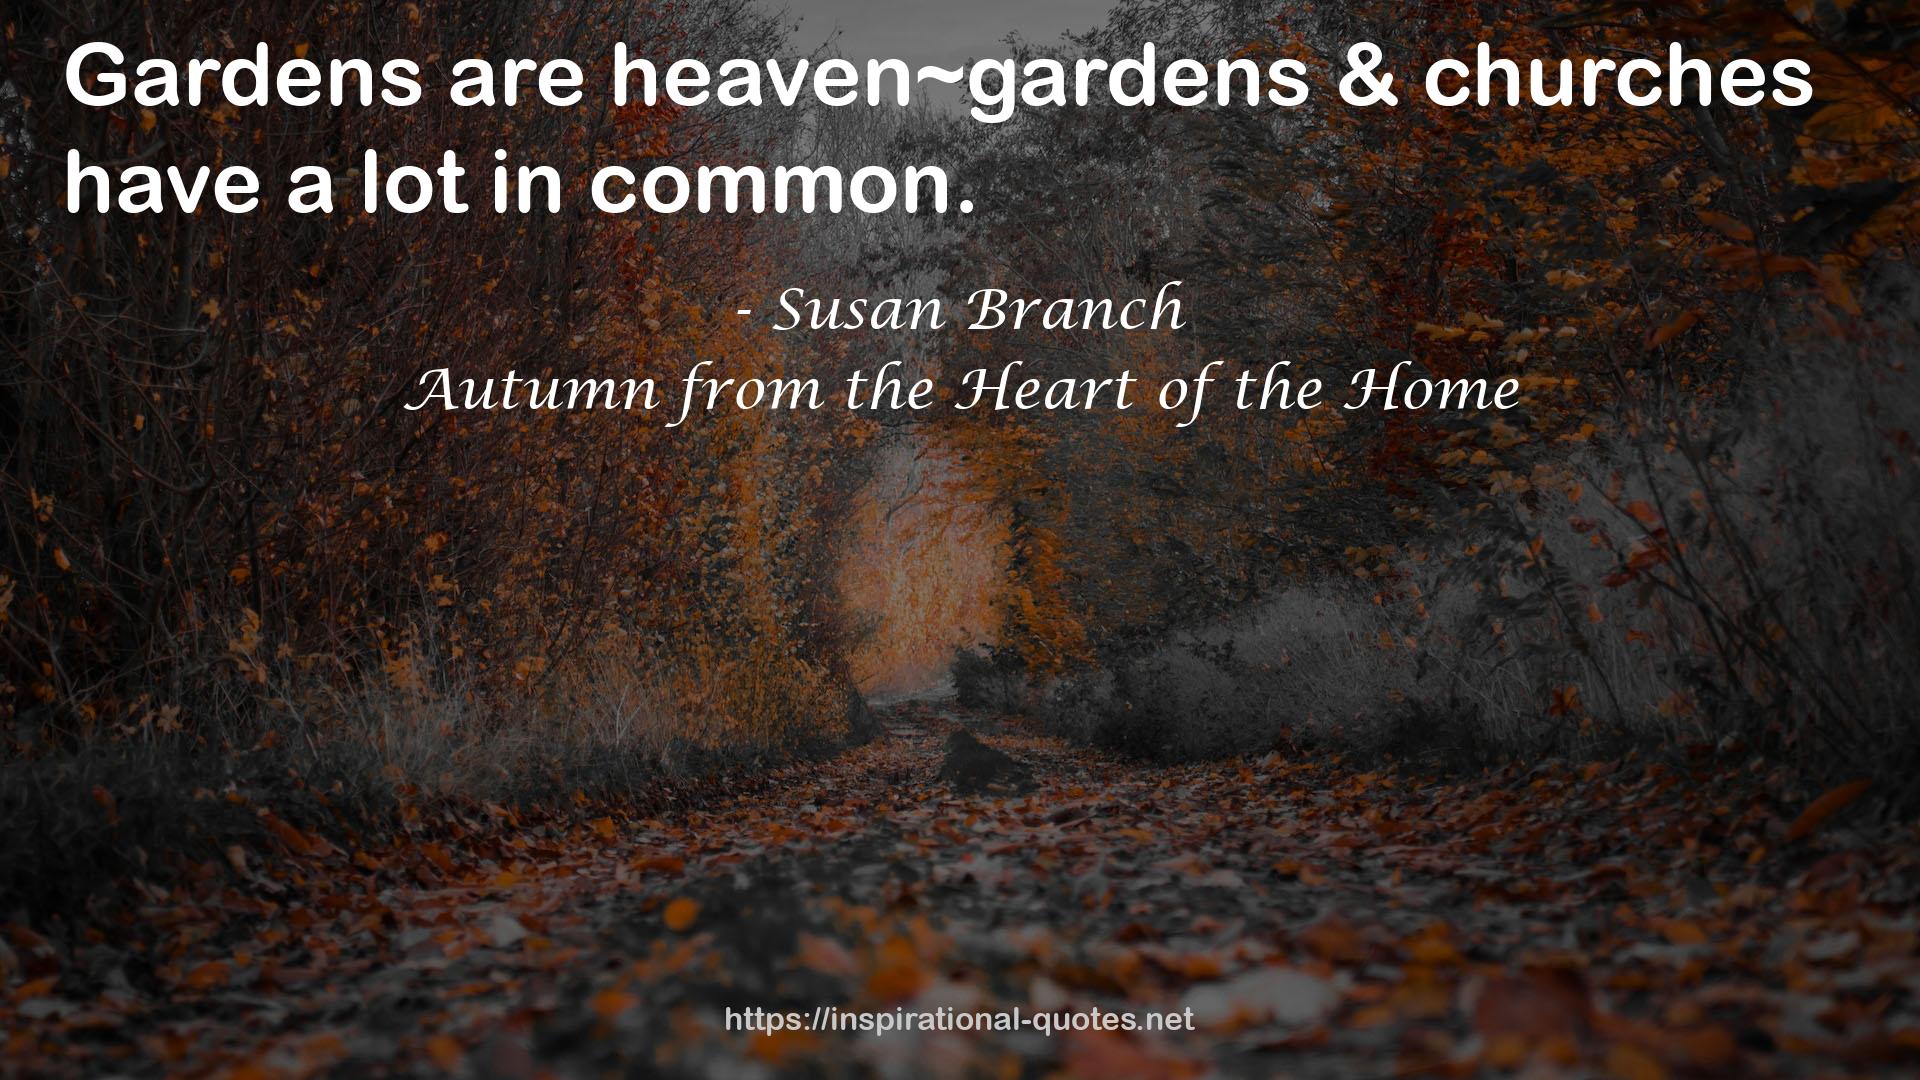 Autumn from the Heart of the Home QUOTES